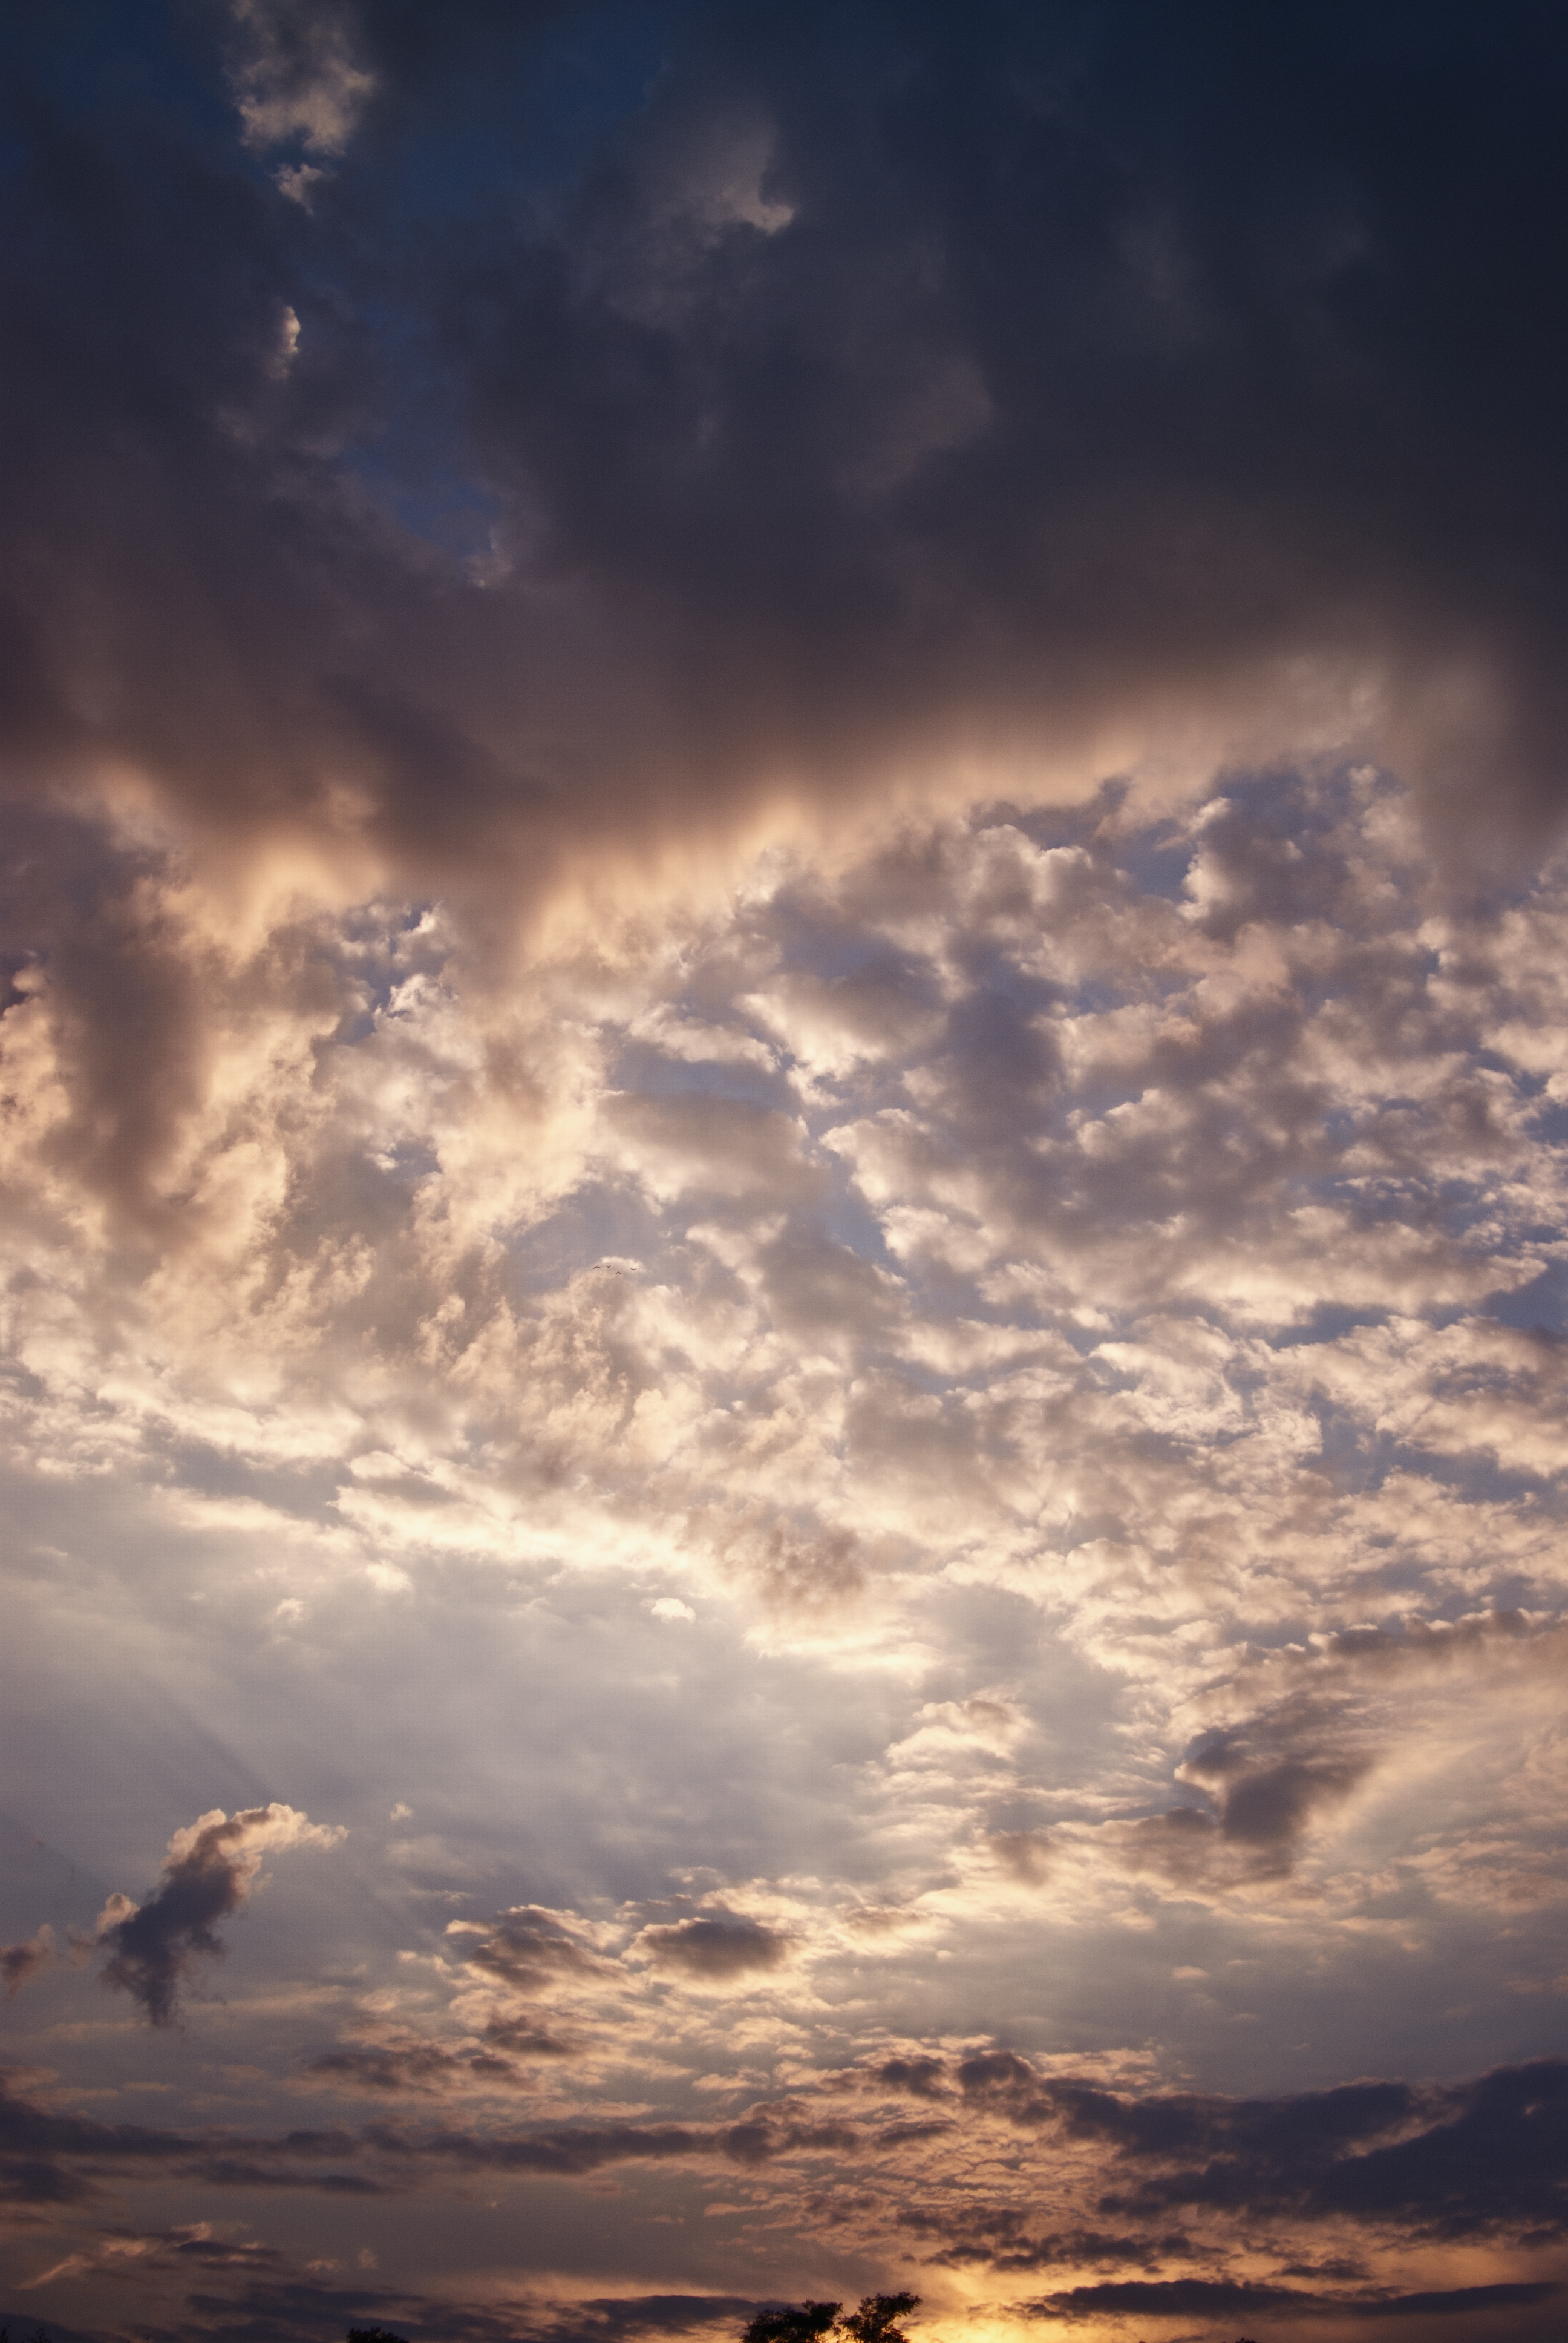 clouds, nature, sunset, sky, evening, cloudy High Definition image